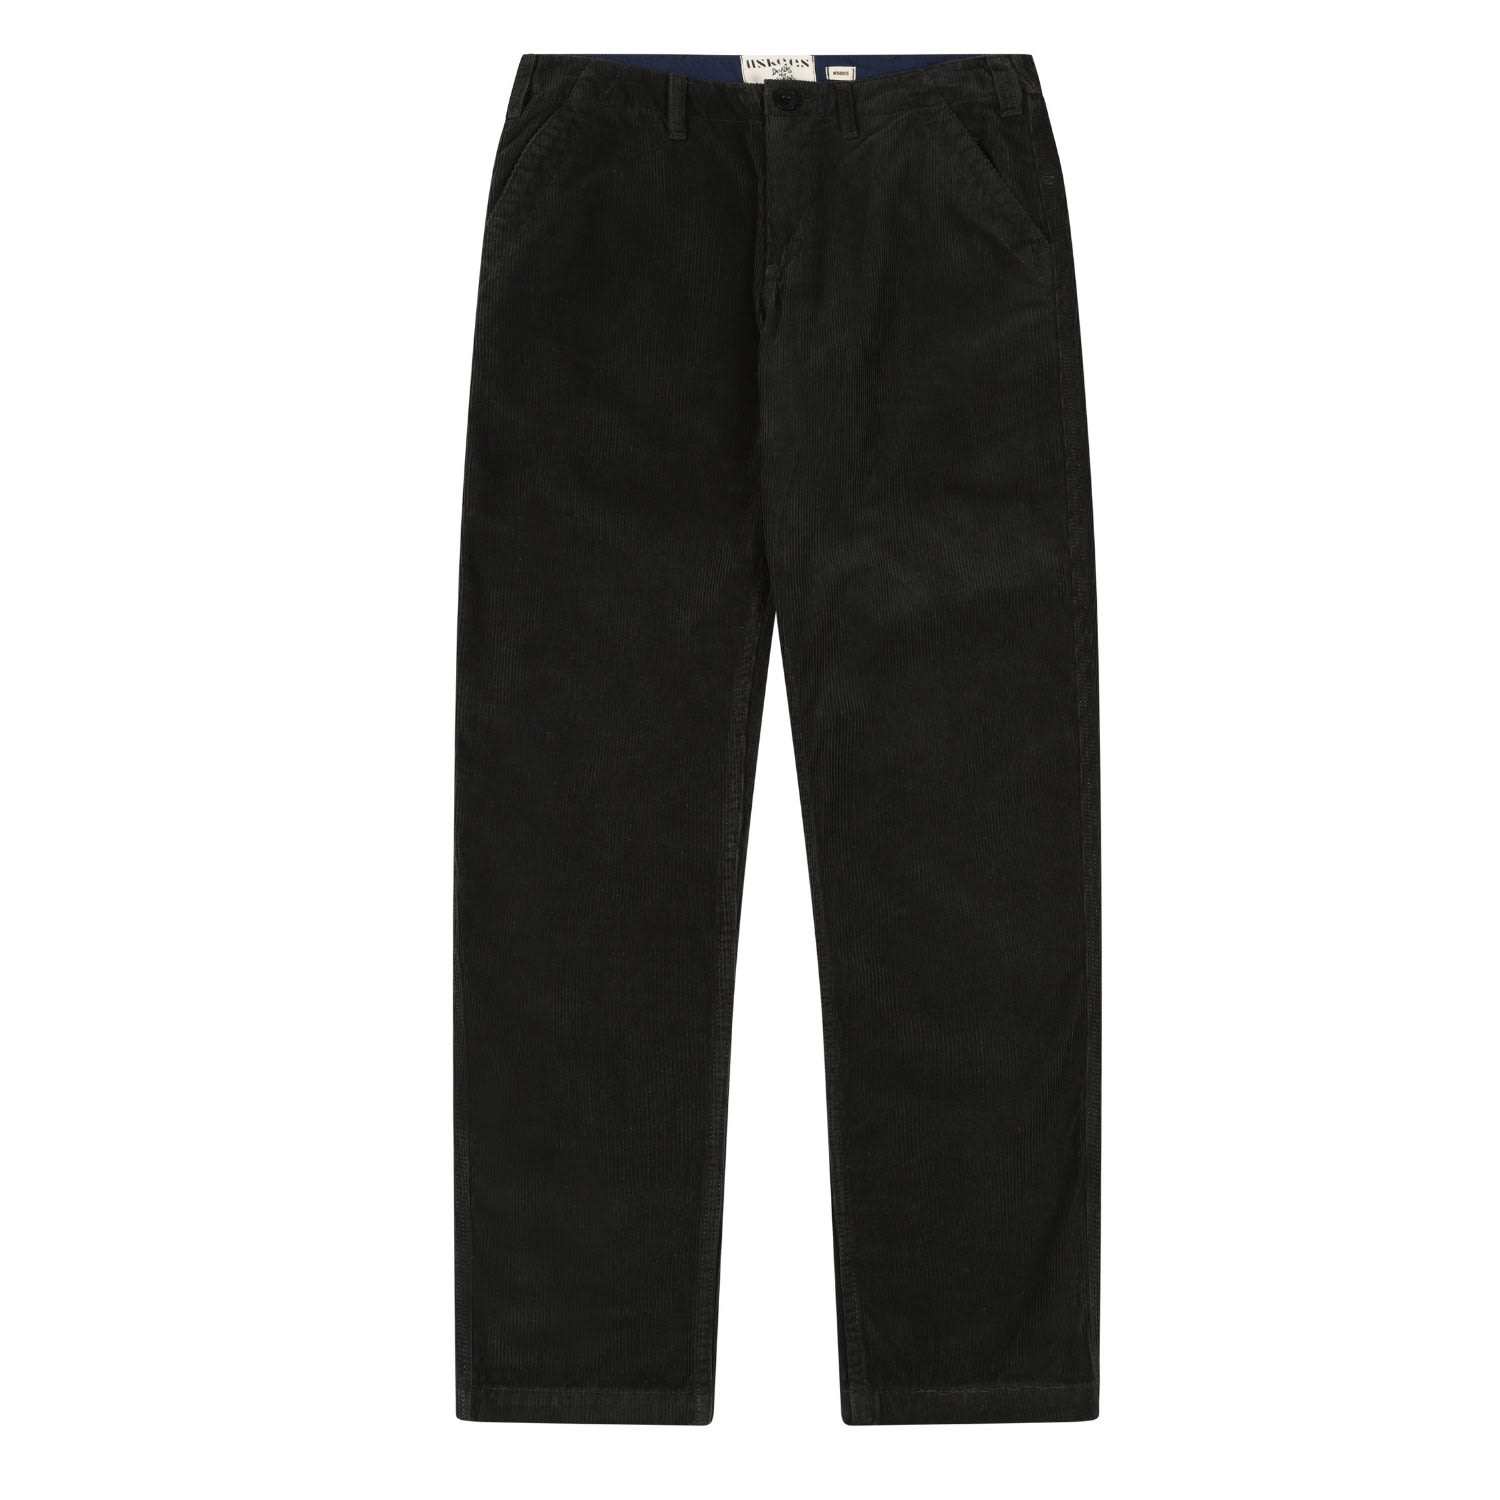 Uskees Men's The 5005 Cord Workwear Pants - Faded Black